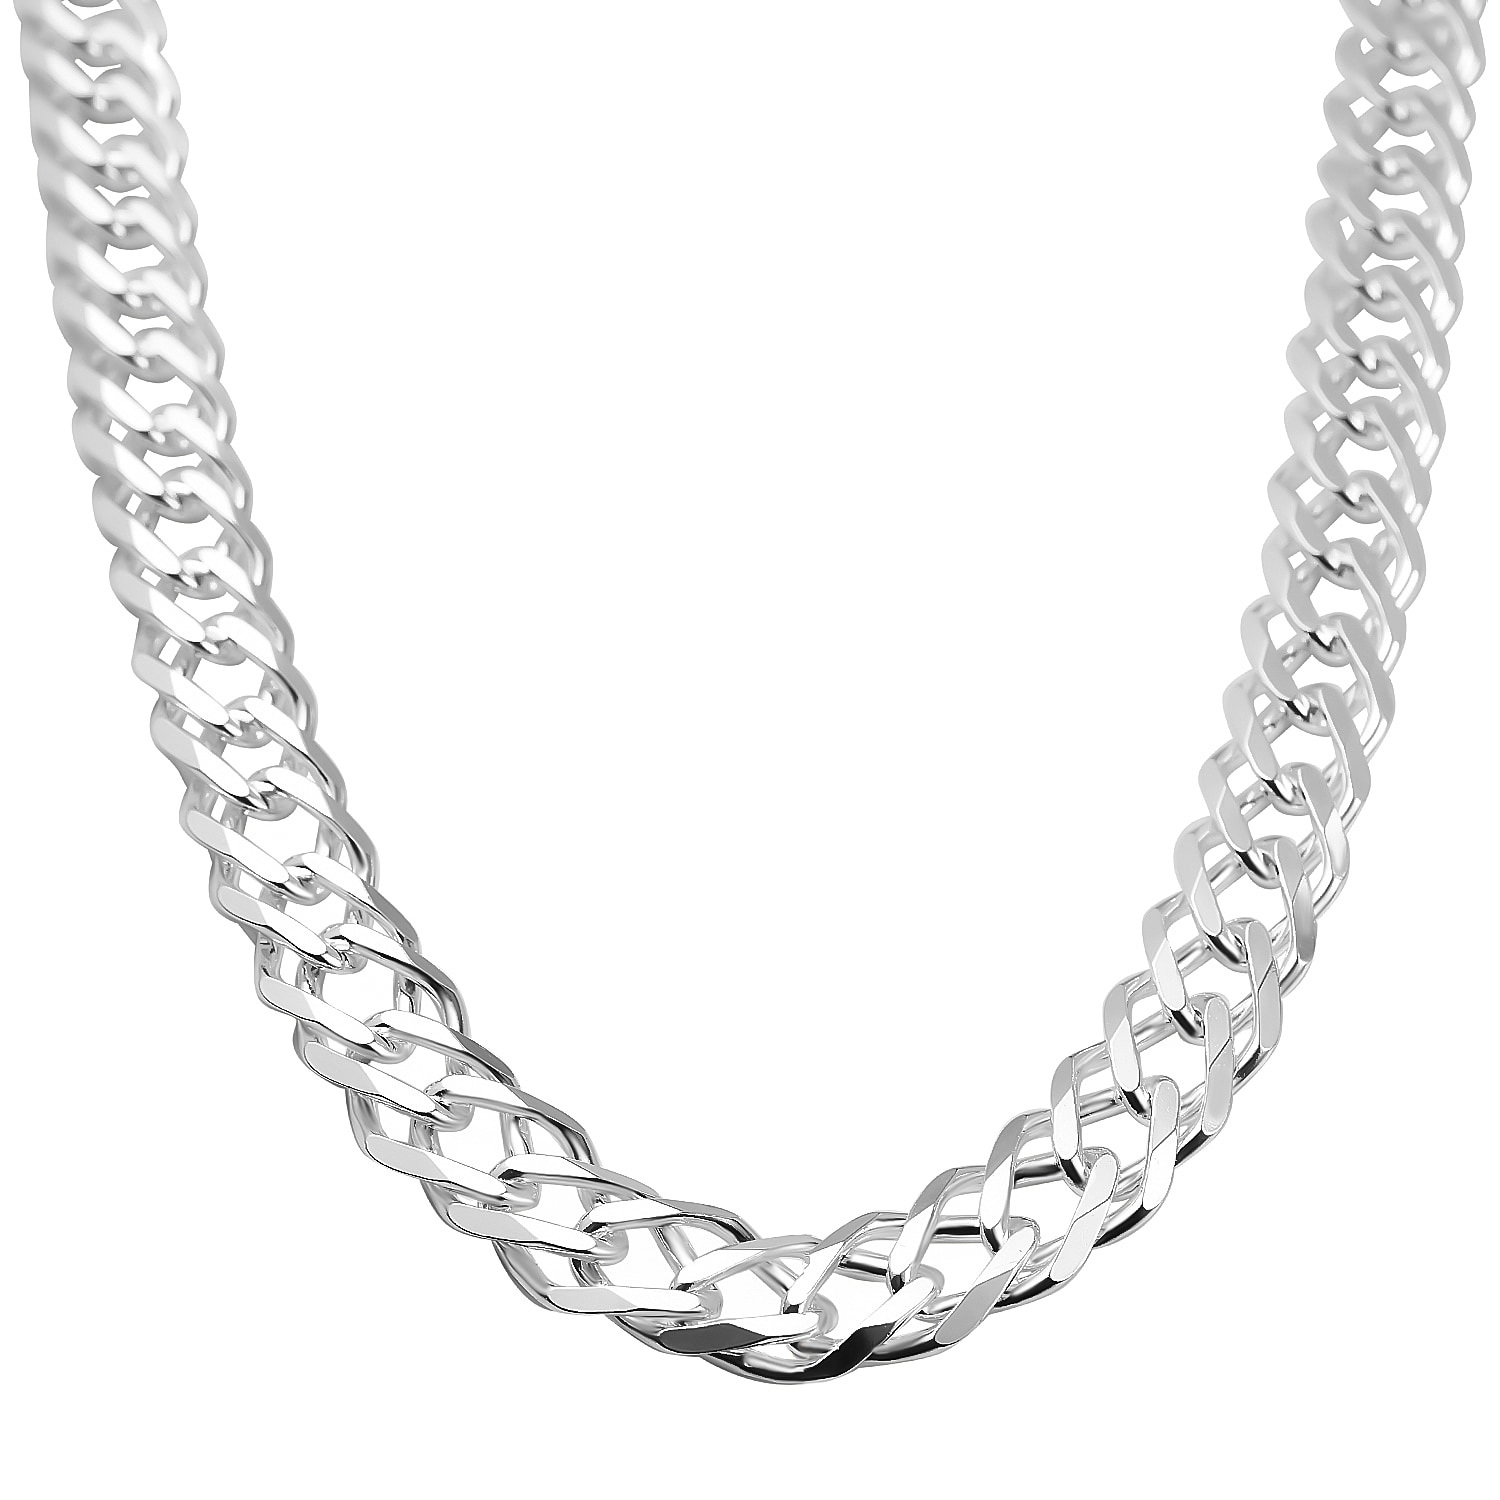 One Time Italian Closeout - Sterling Silver Double Curb Necklace (Size - 20), Silver Wt. 48.3 Gms